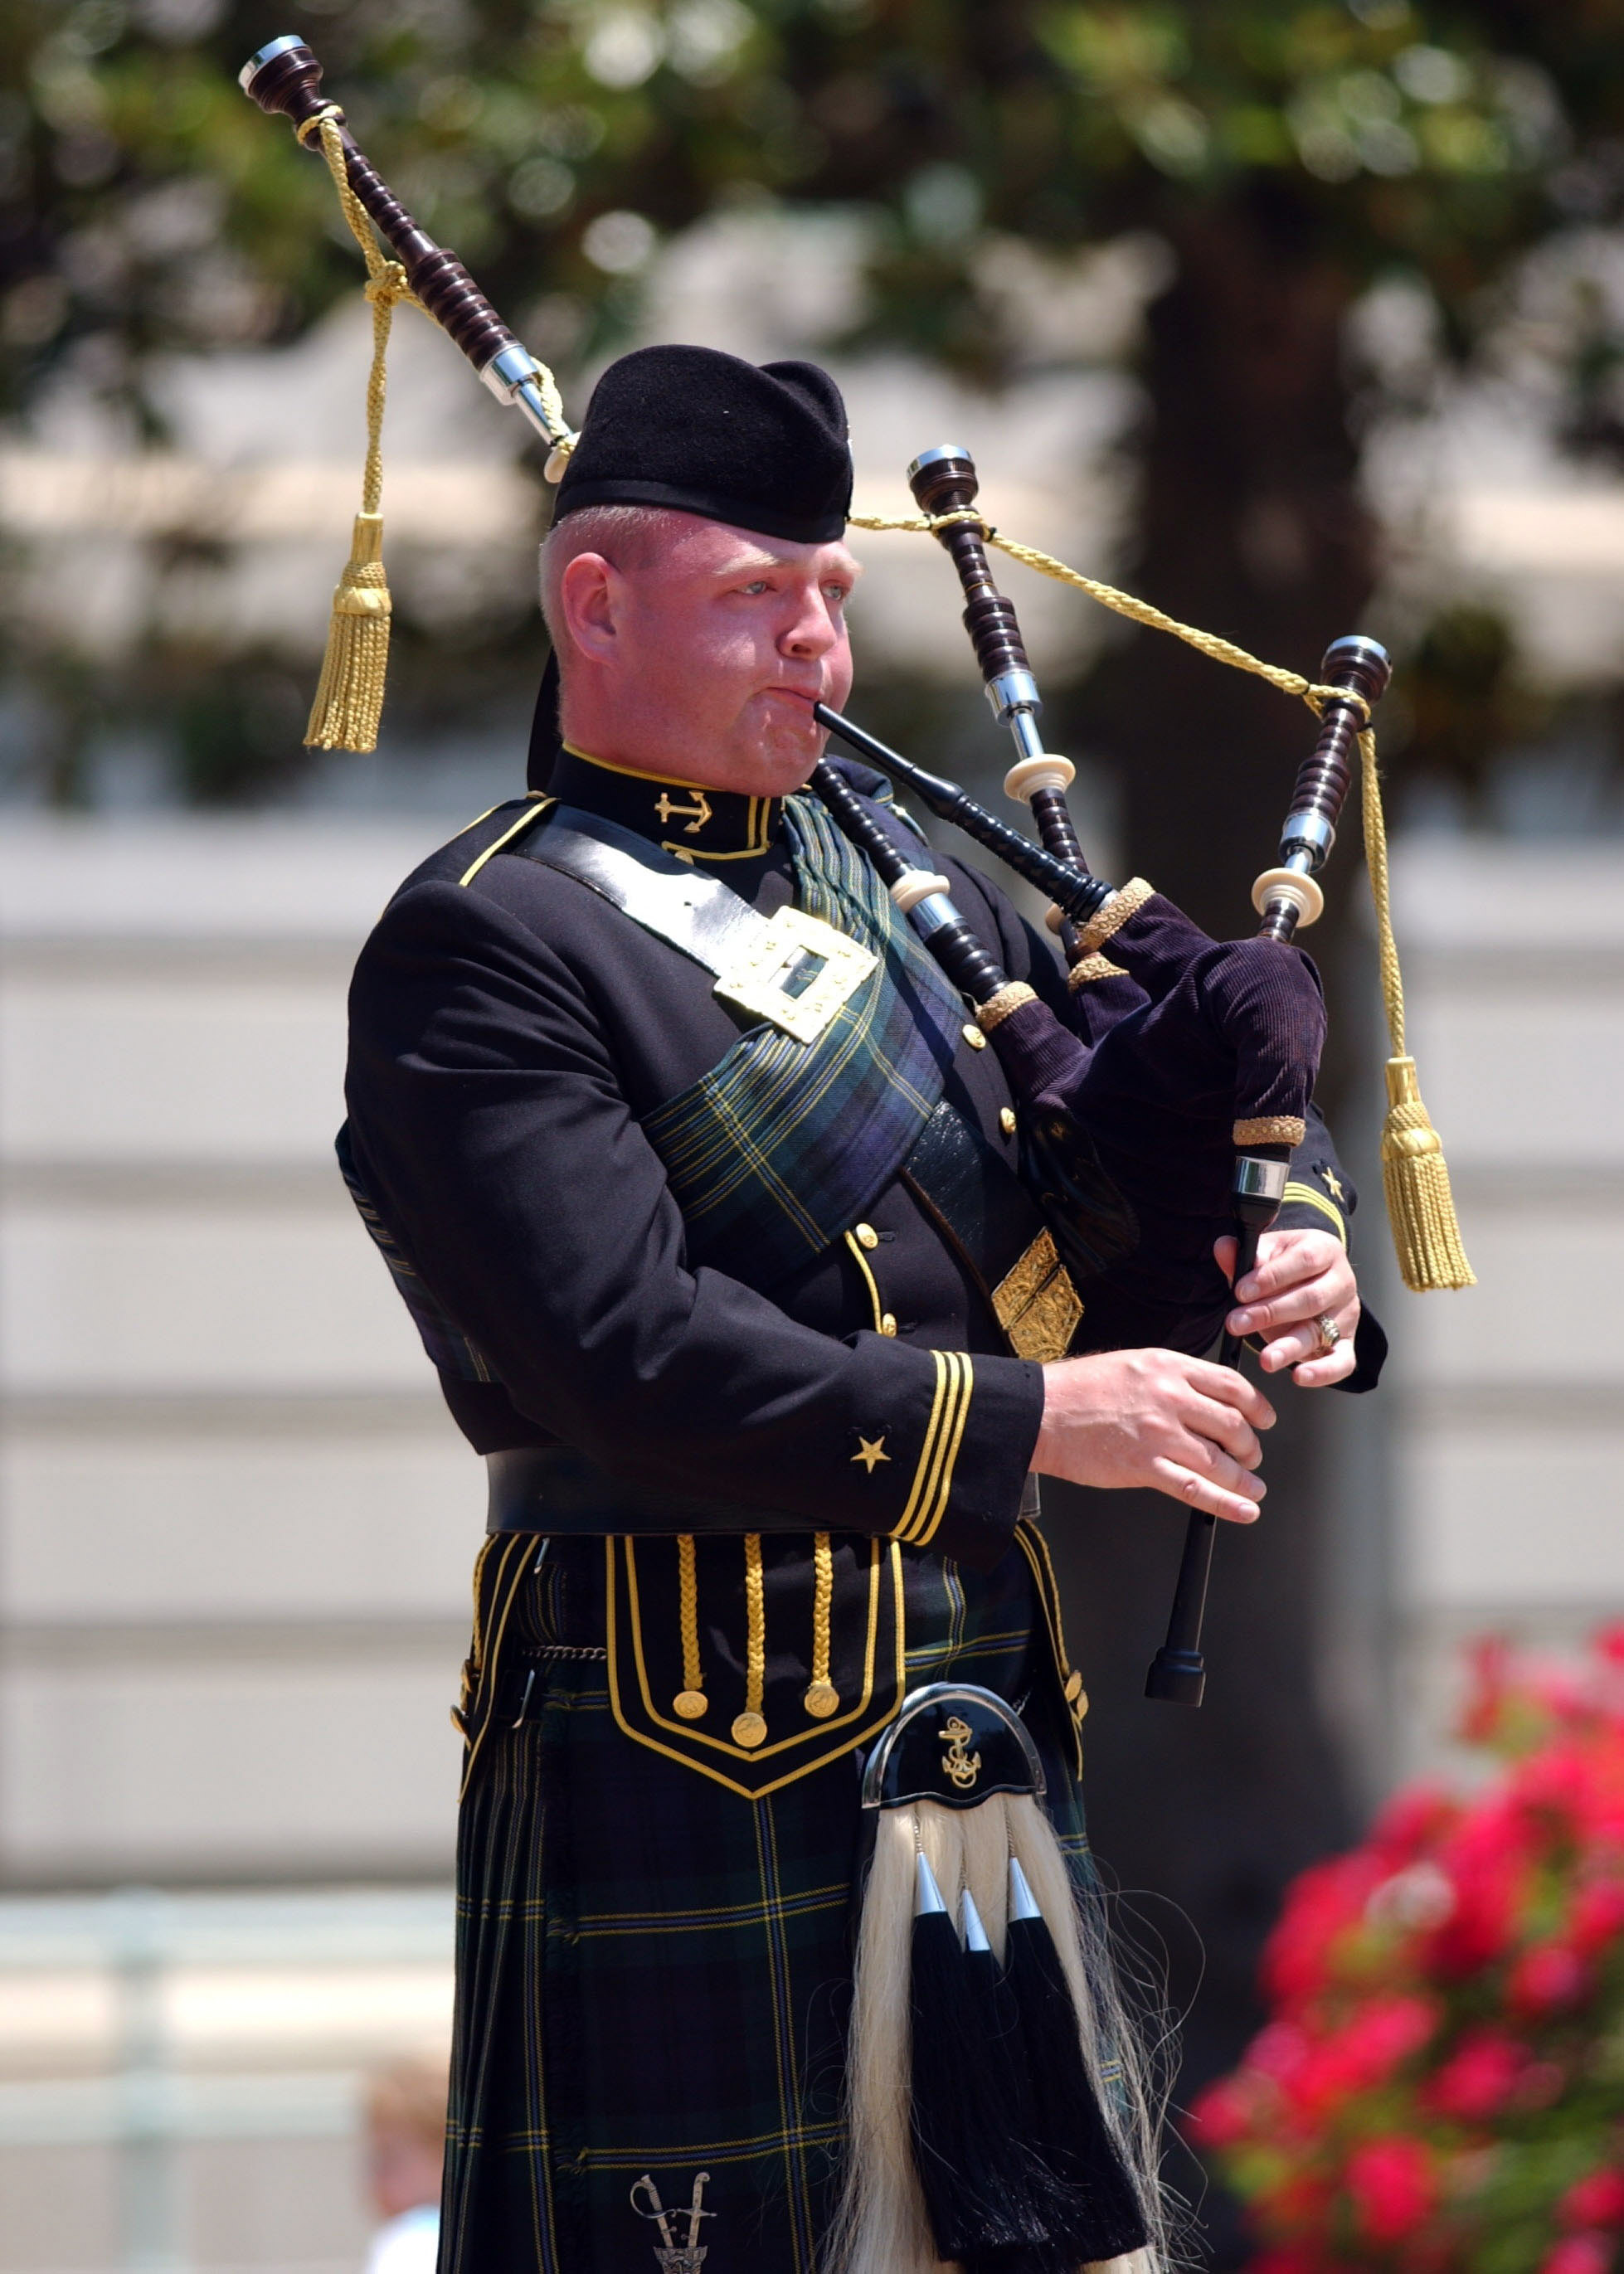 file-us-naval-academy-pipes-and-drums-bagpiper-jpg-wikimedia-commons